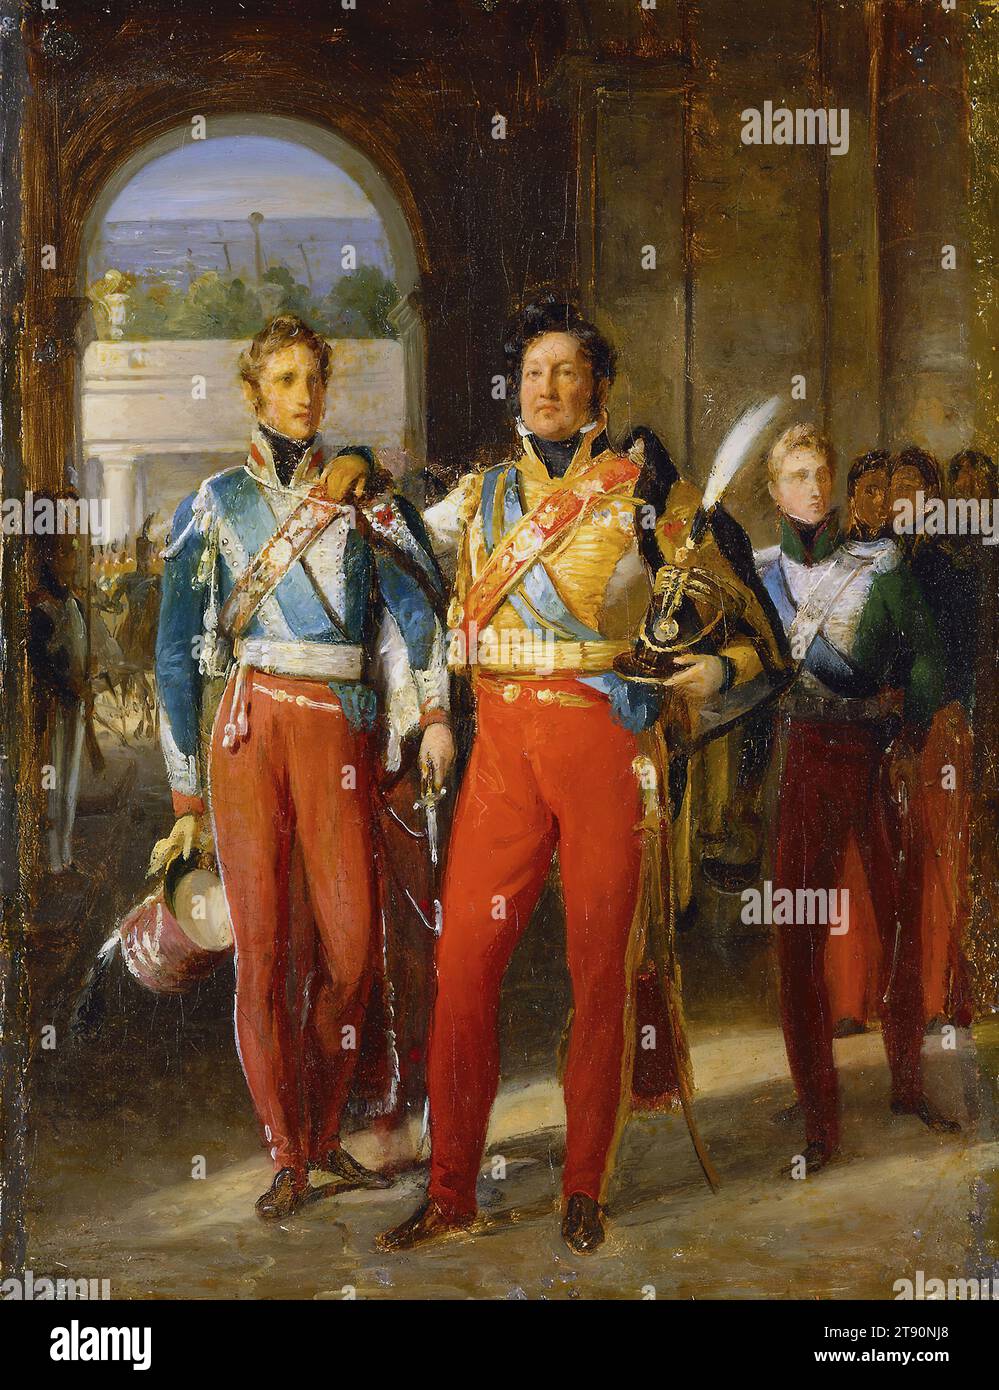 Louis Philippe (1773–1850), King of France, and his Sons, the Duke of Chartres and the Duke of Nemours, c. 1830–1832, Baron François-Pascal-Simon Gérard, French, 1770 - 1837, 13 3/4 x 10 7/8 in. (34.93 x 27.62 cm) (canvas)9 7/16 x 15 7/8 x 1 7/8 in. (23.97 x 40.32 x 4.76 cm) (outer frame), Oil on canvas, France, 19th century, Louis Philippe became King of France following the Revolution of 1830. He was dethroned during the international uprisings of 1848, which caused widespread social disruptions Stock Photo